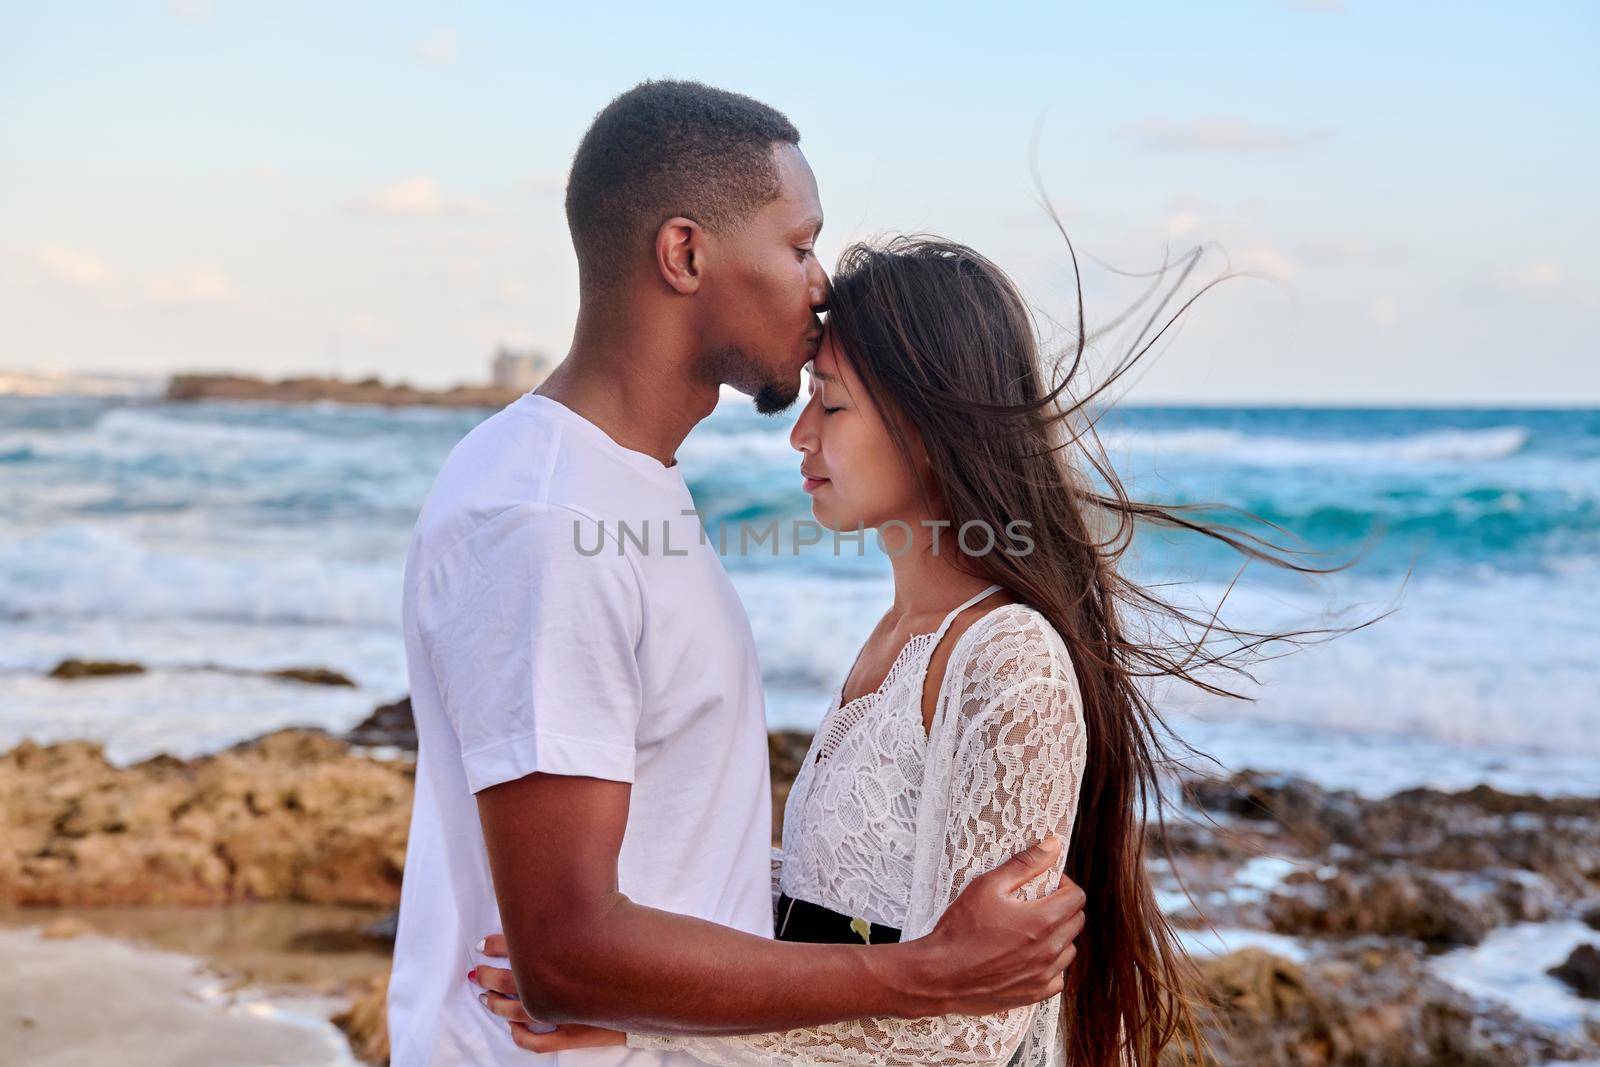 Kiss of loving young couple, sea sky background. Beautiful multicultural couple, profile view, honeymoon at seaside resort, vacation together. Love, relationship, tourism travel, nature beauty people